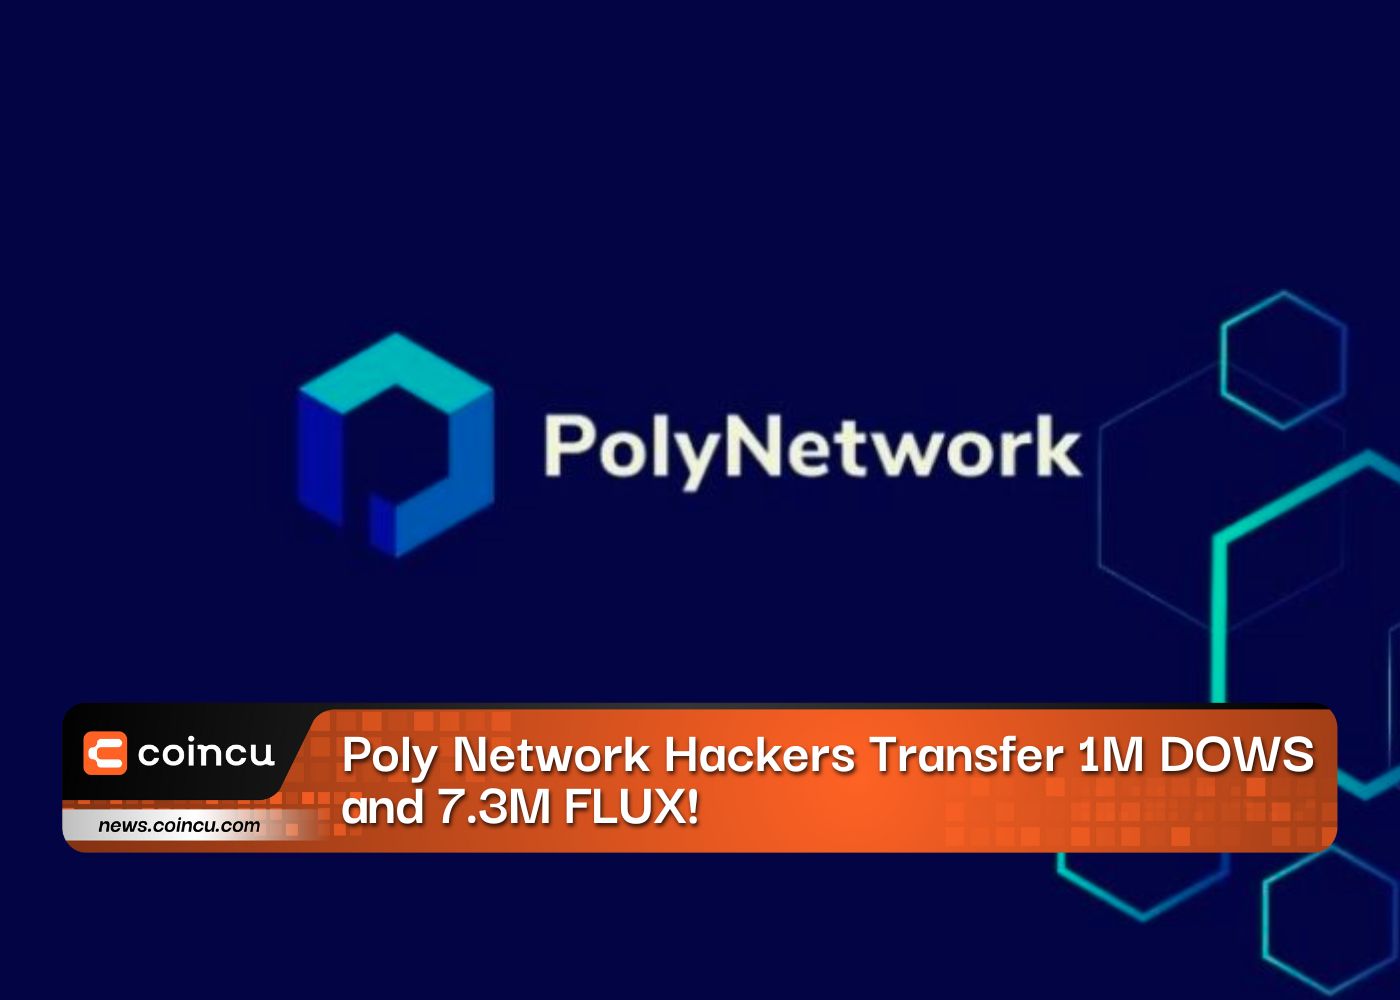 Poly Network Hackers Transfer 1M DOWS